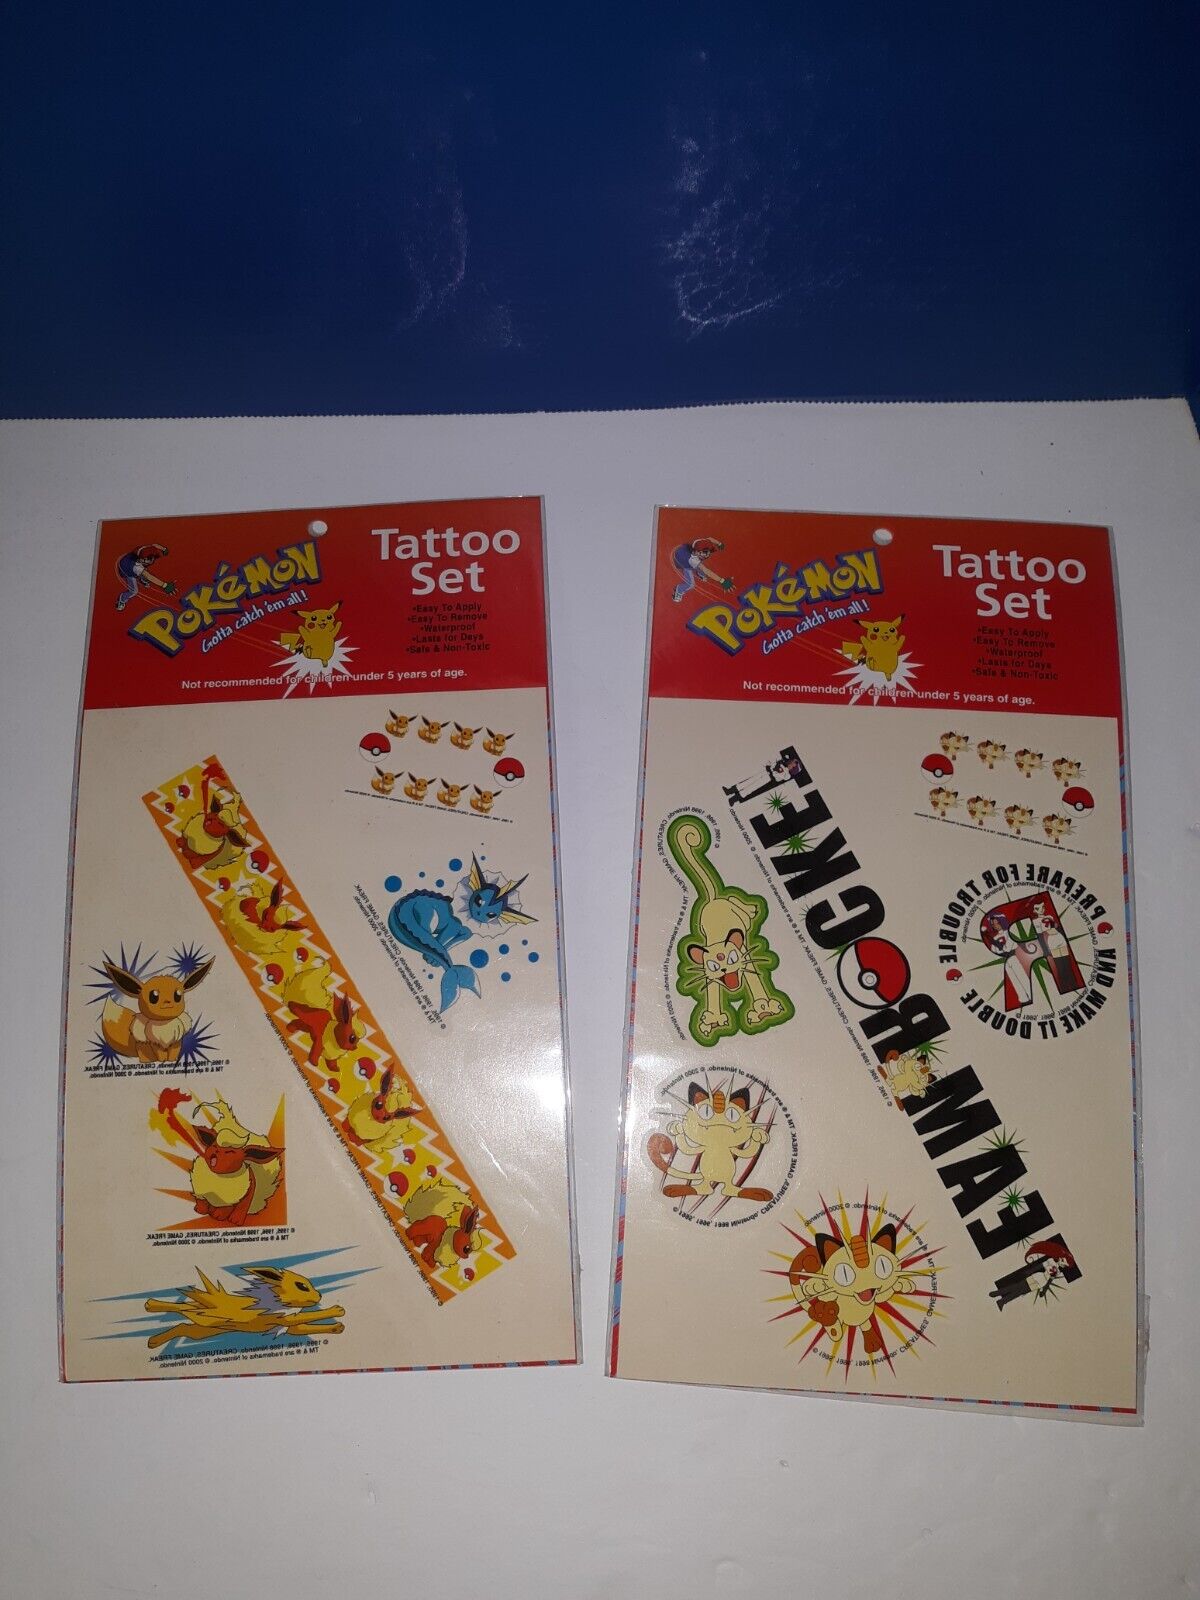 Vintage POKEMON Temporary Tattoos Lot Of 2 sealed Packages 1999 Play by Play